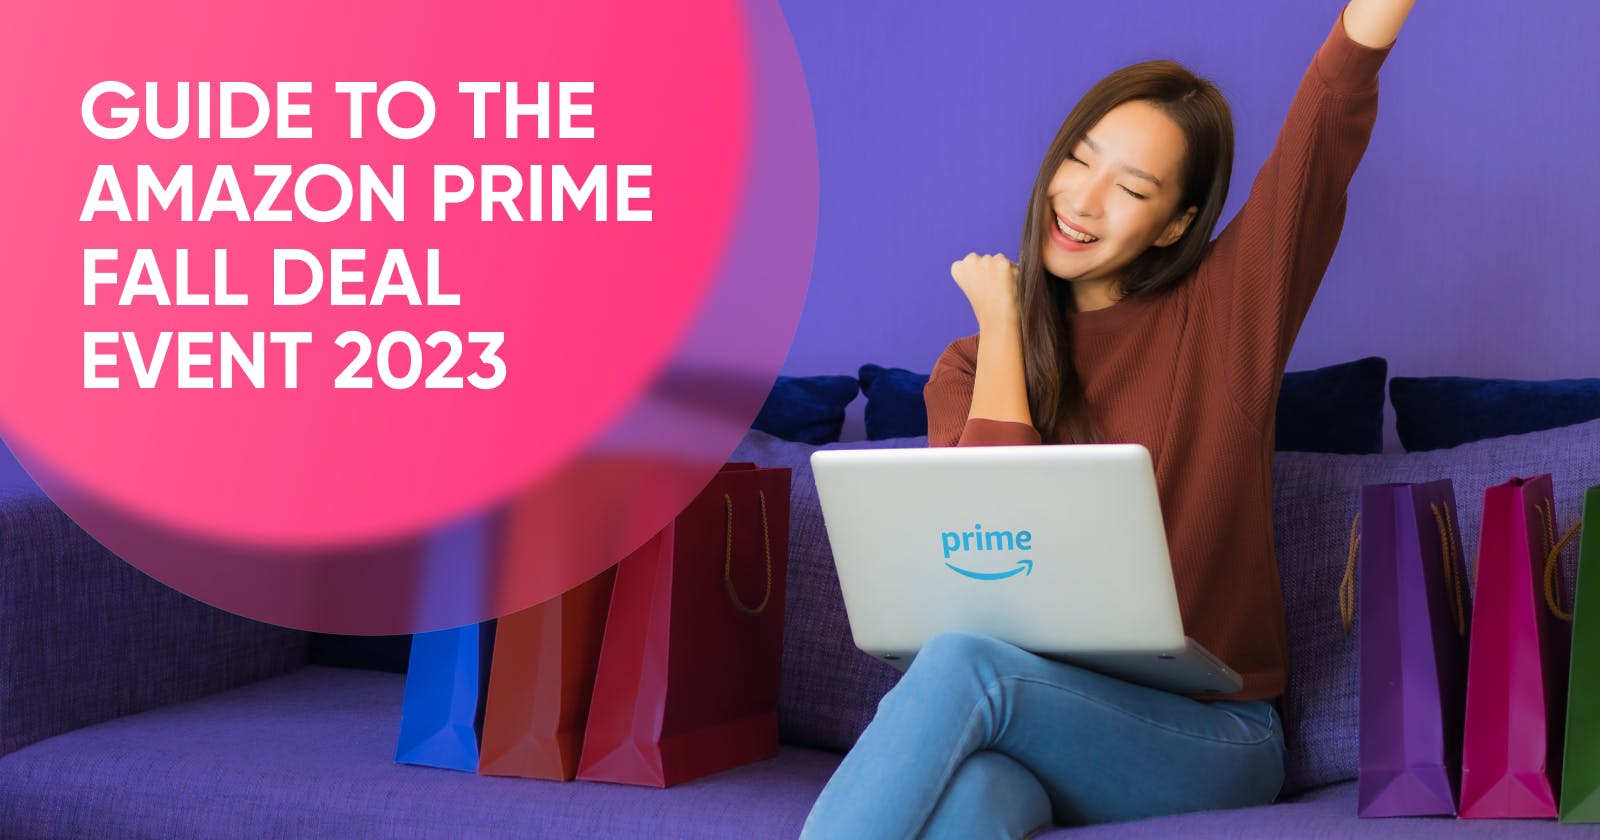 Guide to the Amazon Prime Fall Deal Event 2023: Seller's Preparation Handbook